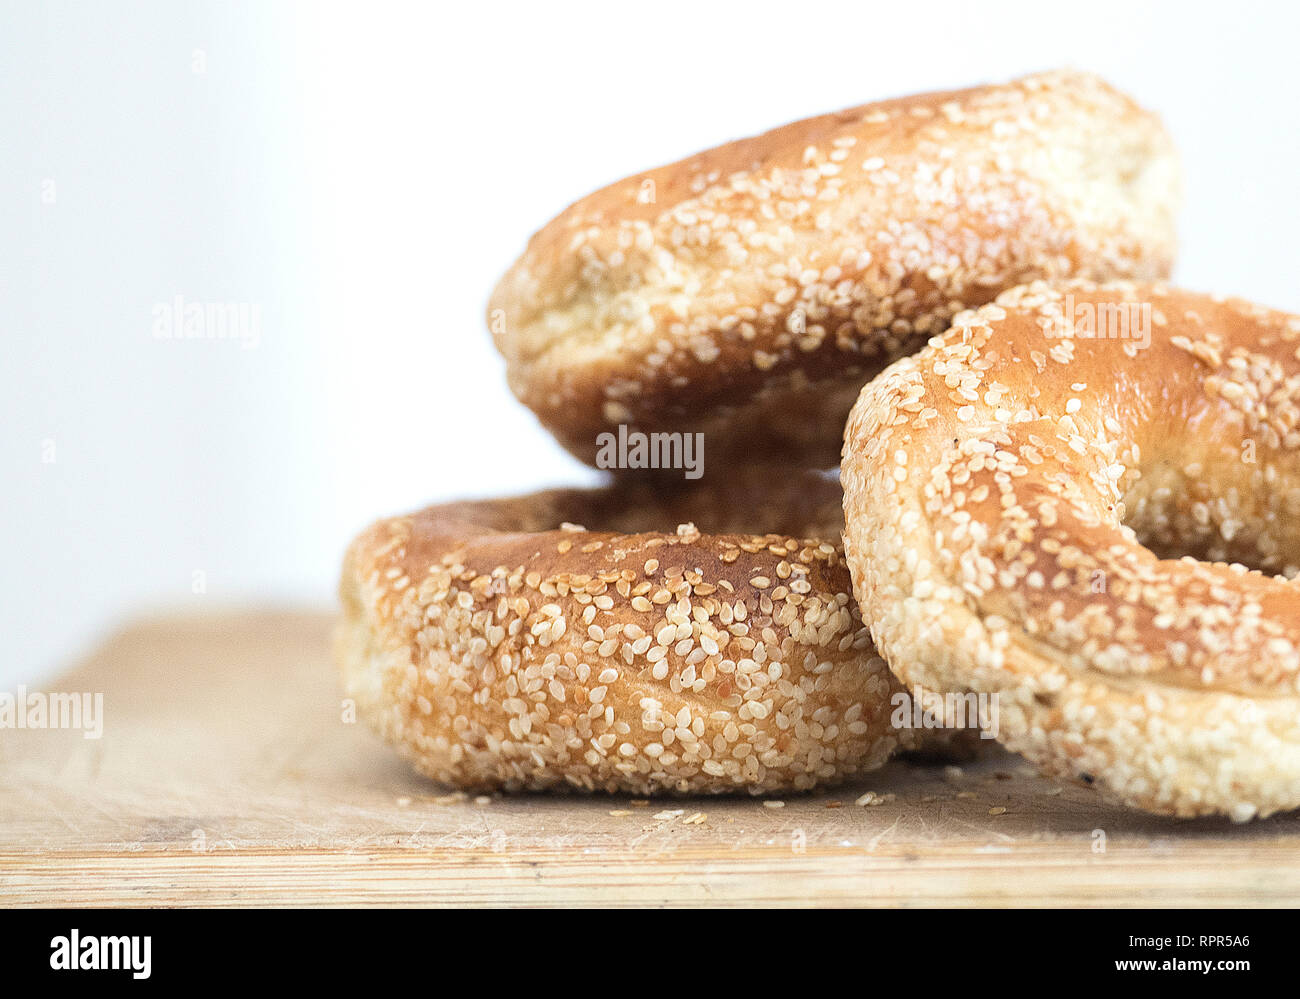 Montreal sesame seed bagels are shown on a cutting board Stock Photo